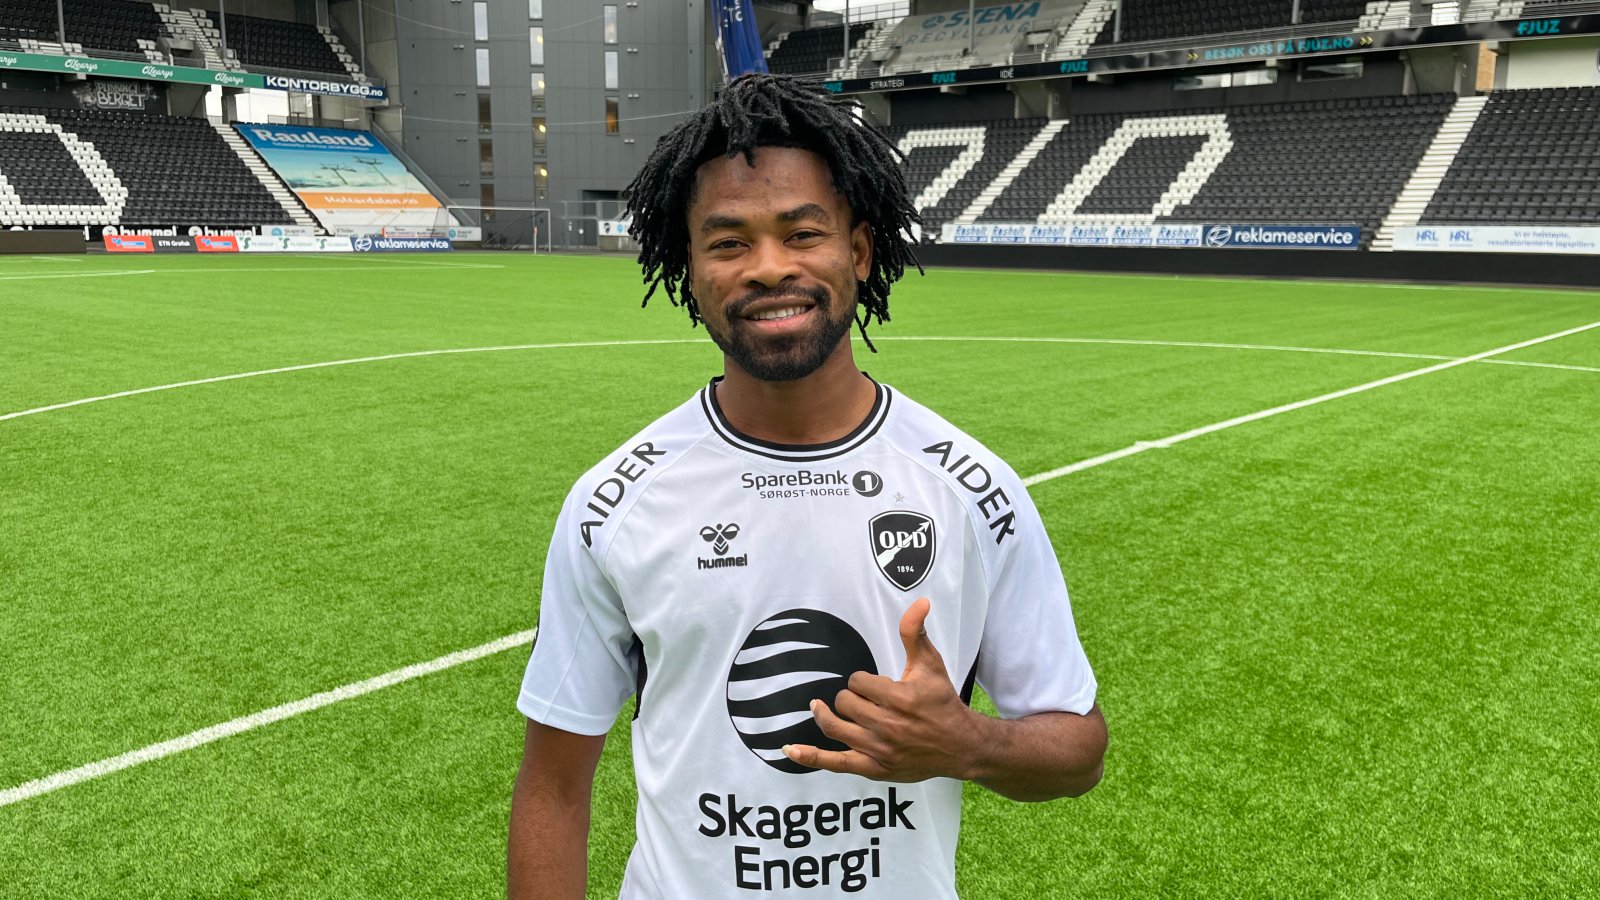 Ghanaian forward Mugeese Zakaria delighted with Odds Ballklubb move